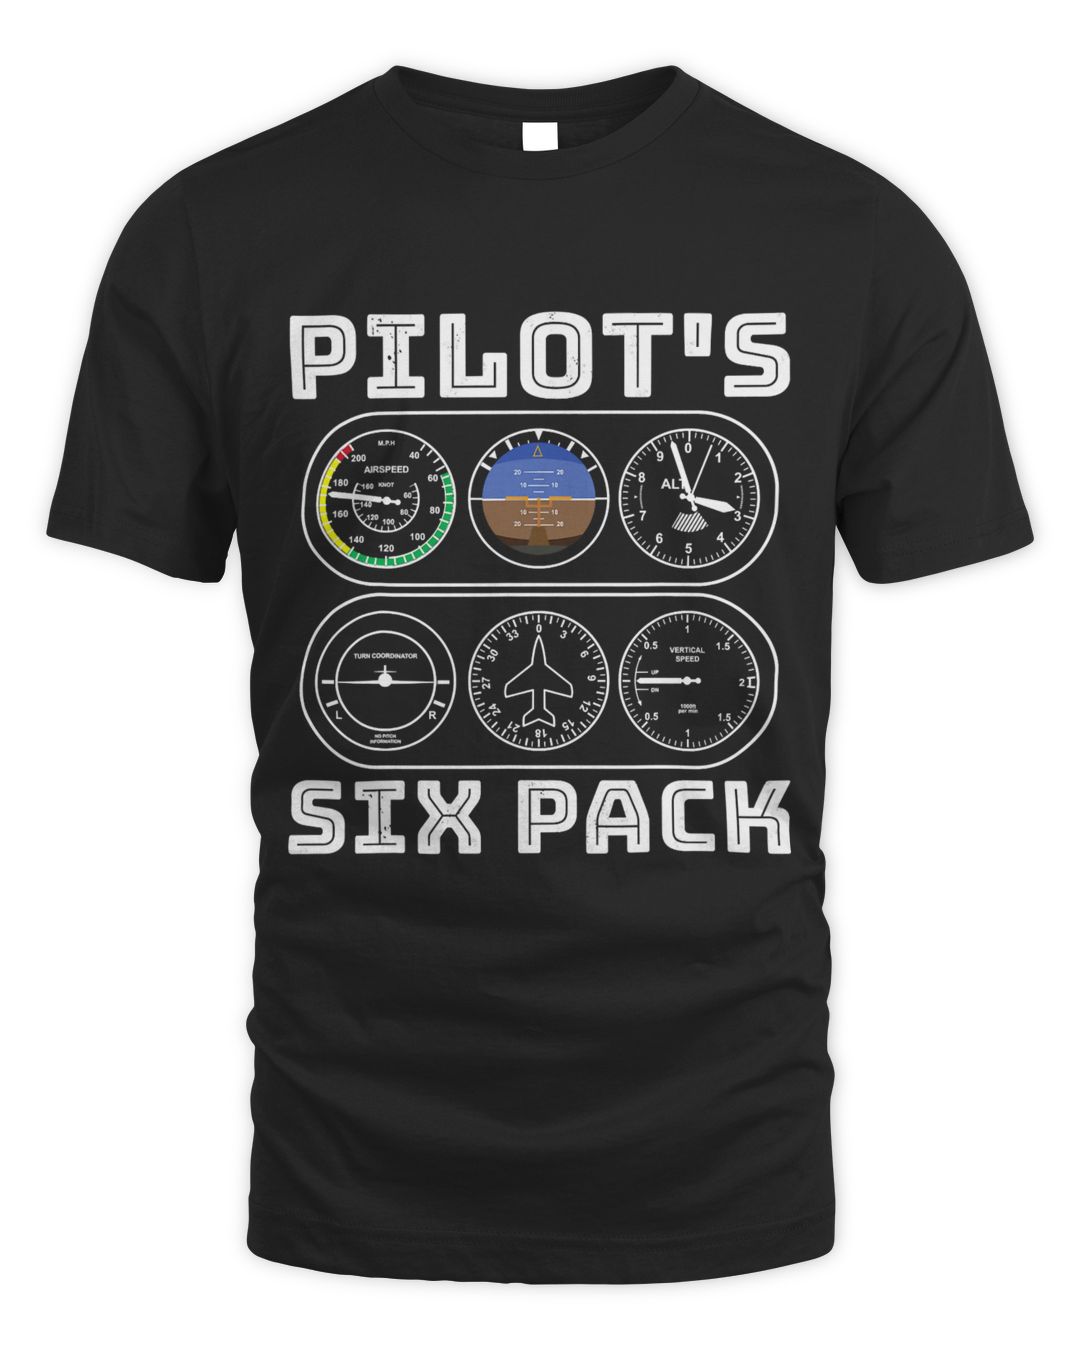 Six Pack Flying Airplane Outfit I Fun Pilot Aviation 6-Pack T-Shirt